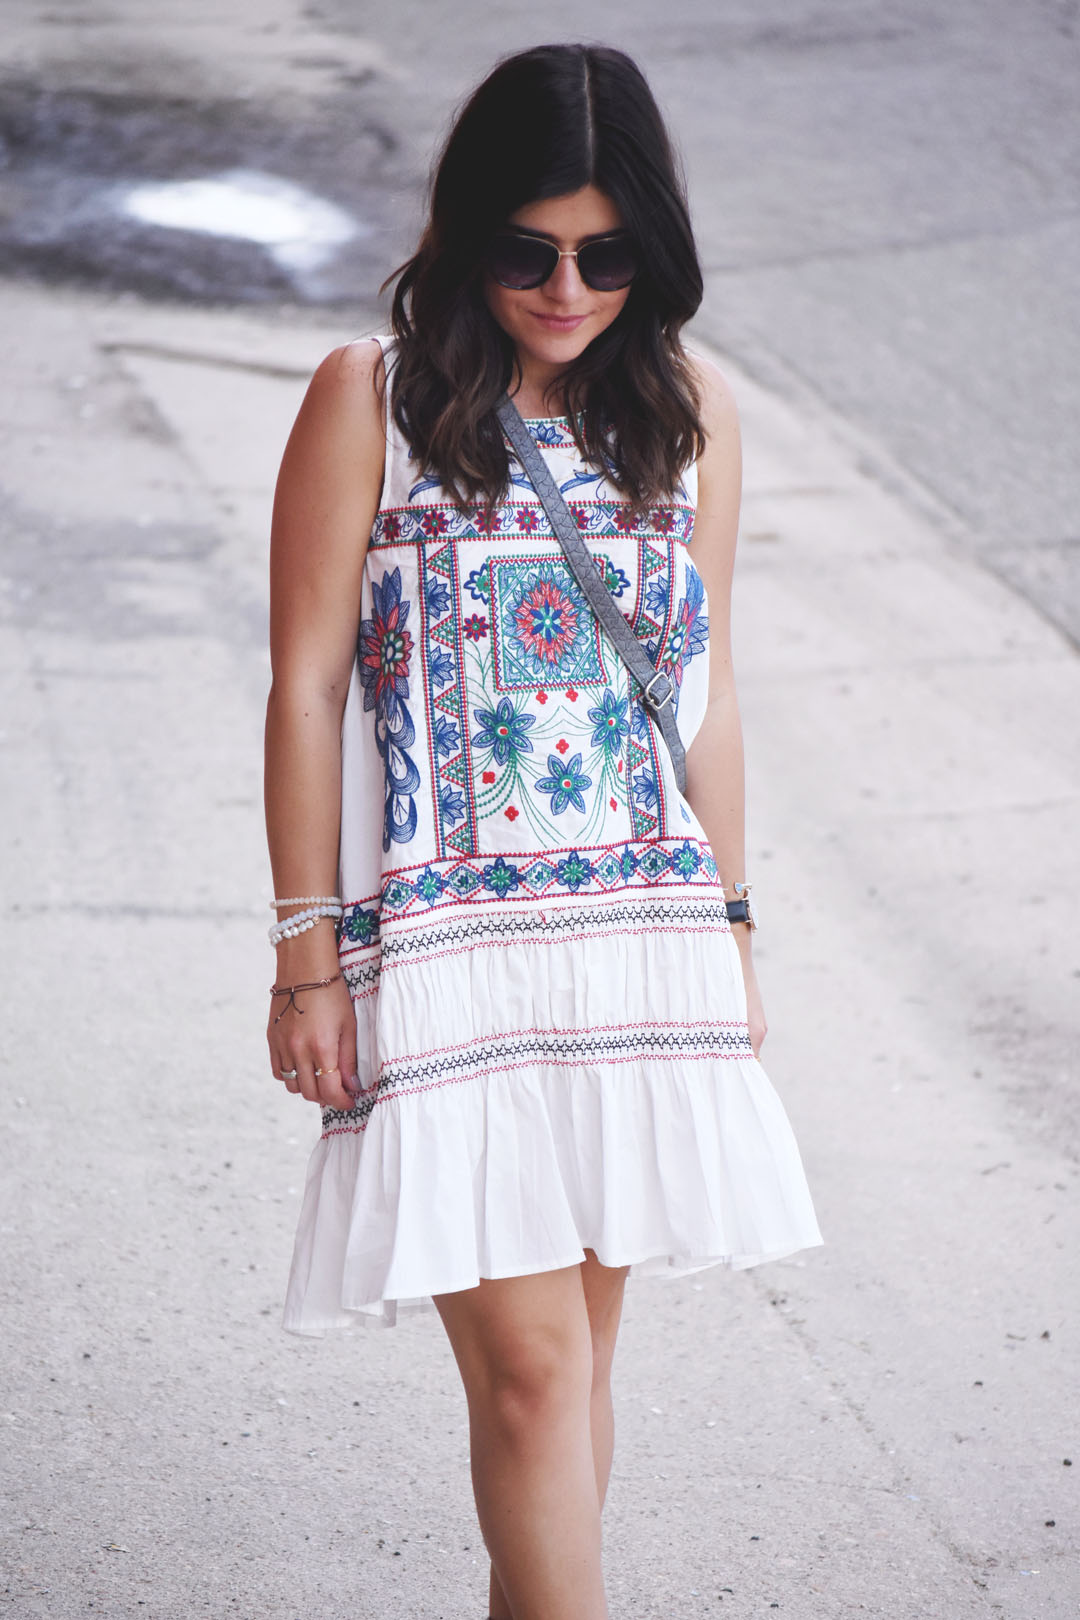 Carolina Hellal of the fashion blog Chic Talk wearing a Chicwish white embroidered dress and Nordstrom sunglasses - BOHO EMBROIDERED SUMMER DRESS by popular Denver fashion blogger Chic Talk